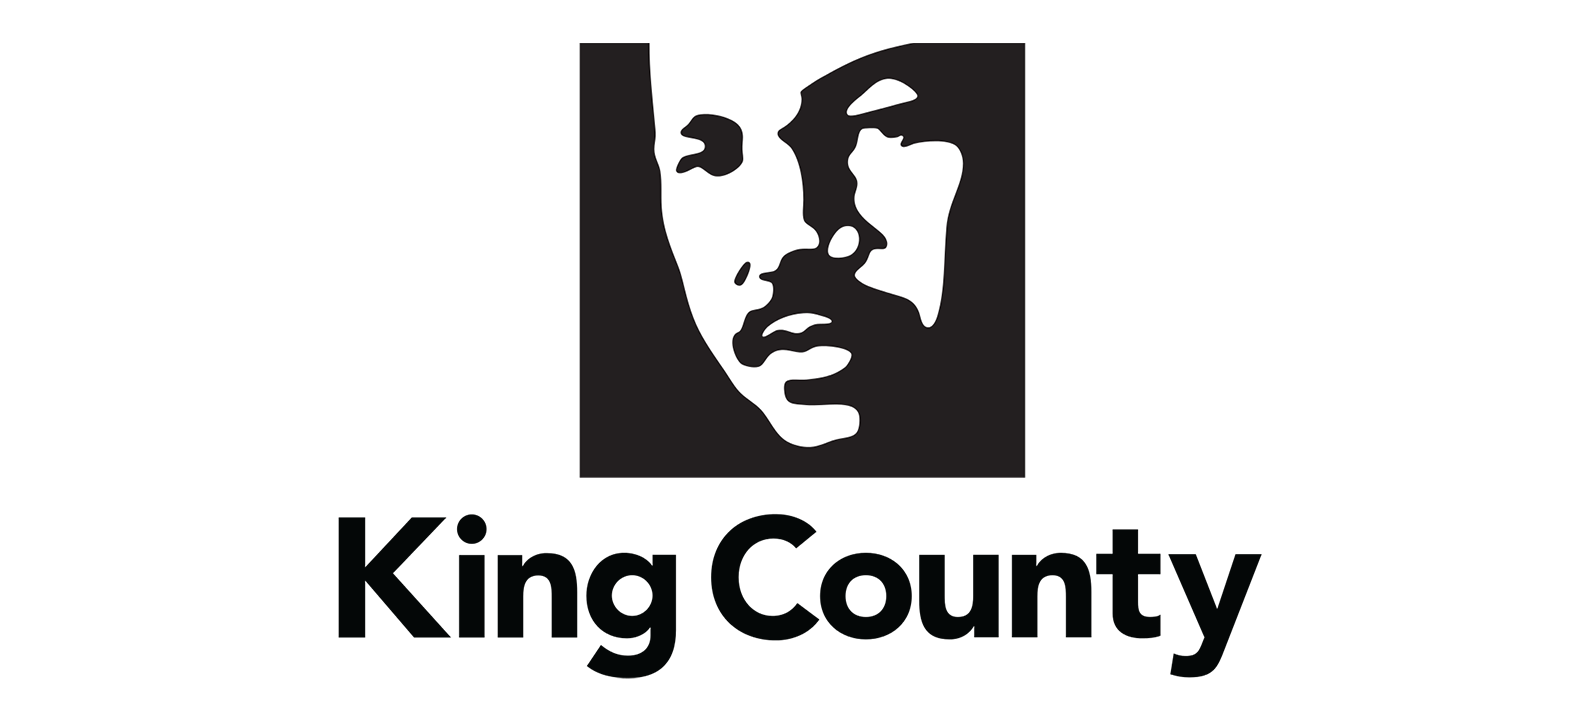 King County computer repair, network support, hosting, and technology contracting